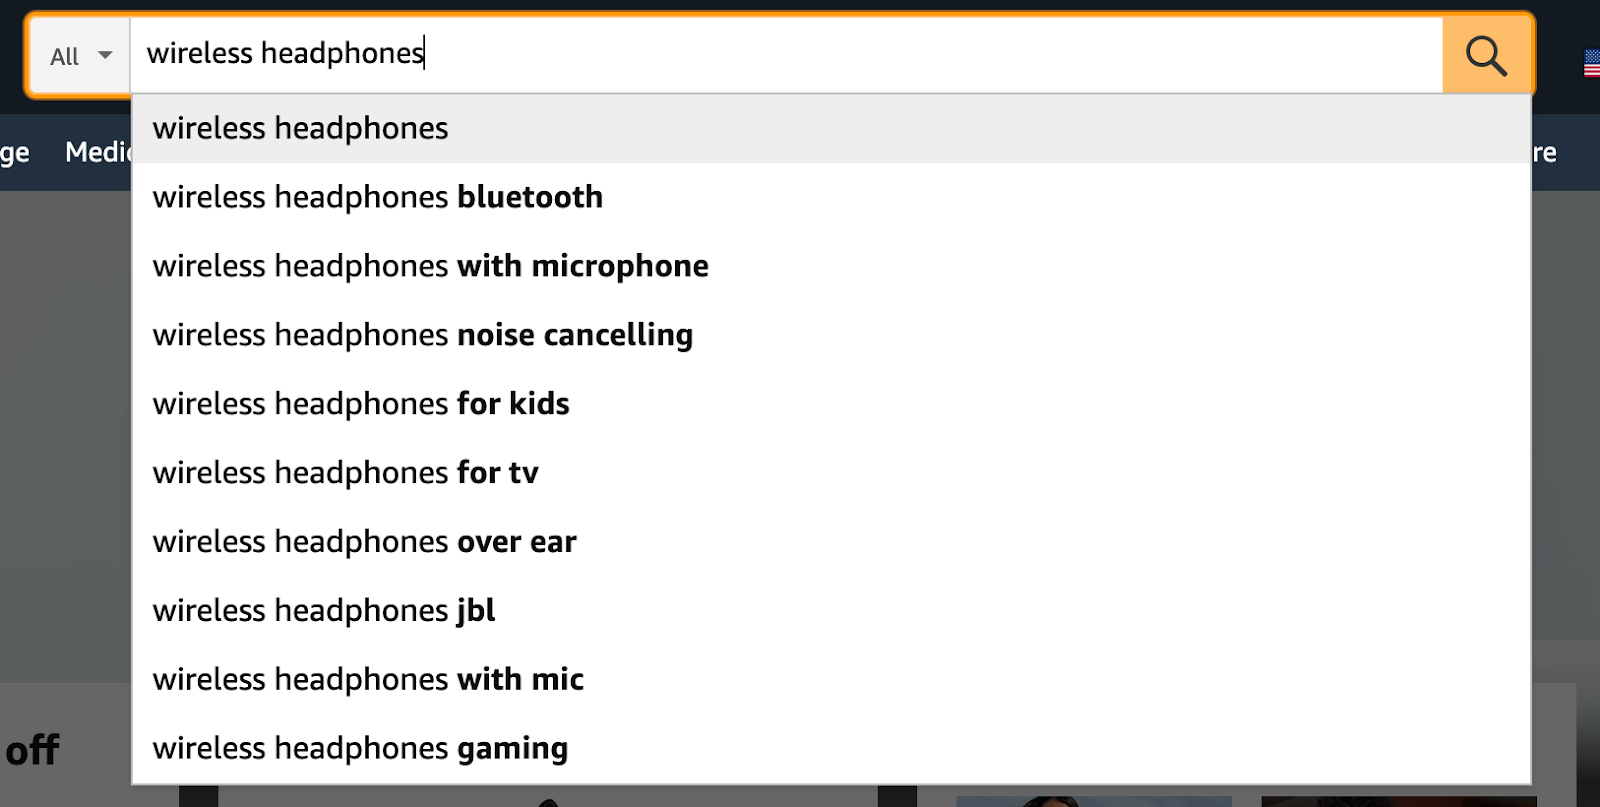 Amazon’s search feature suggestions when typing "wireless headphones"